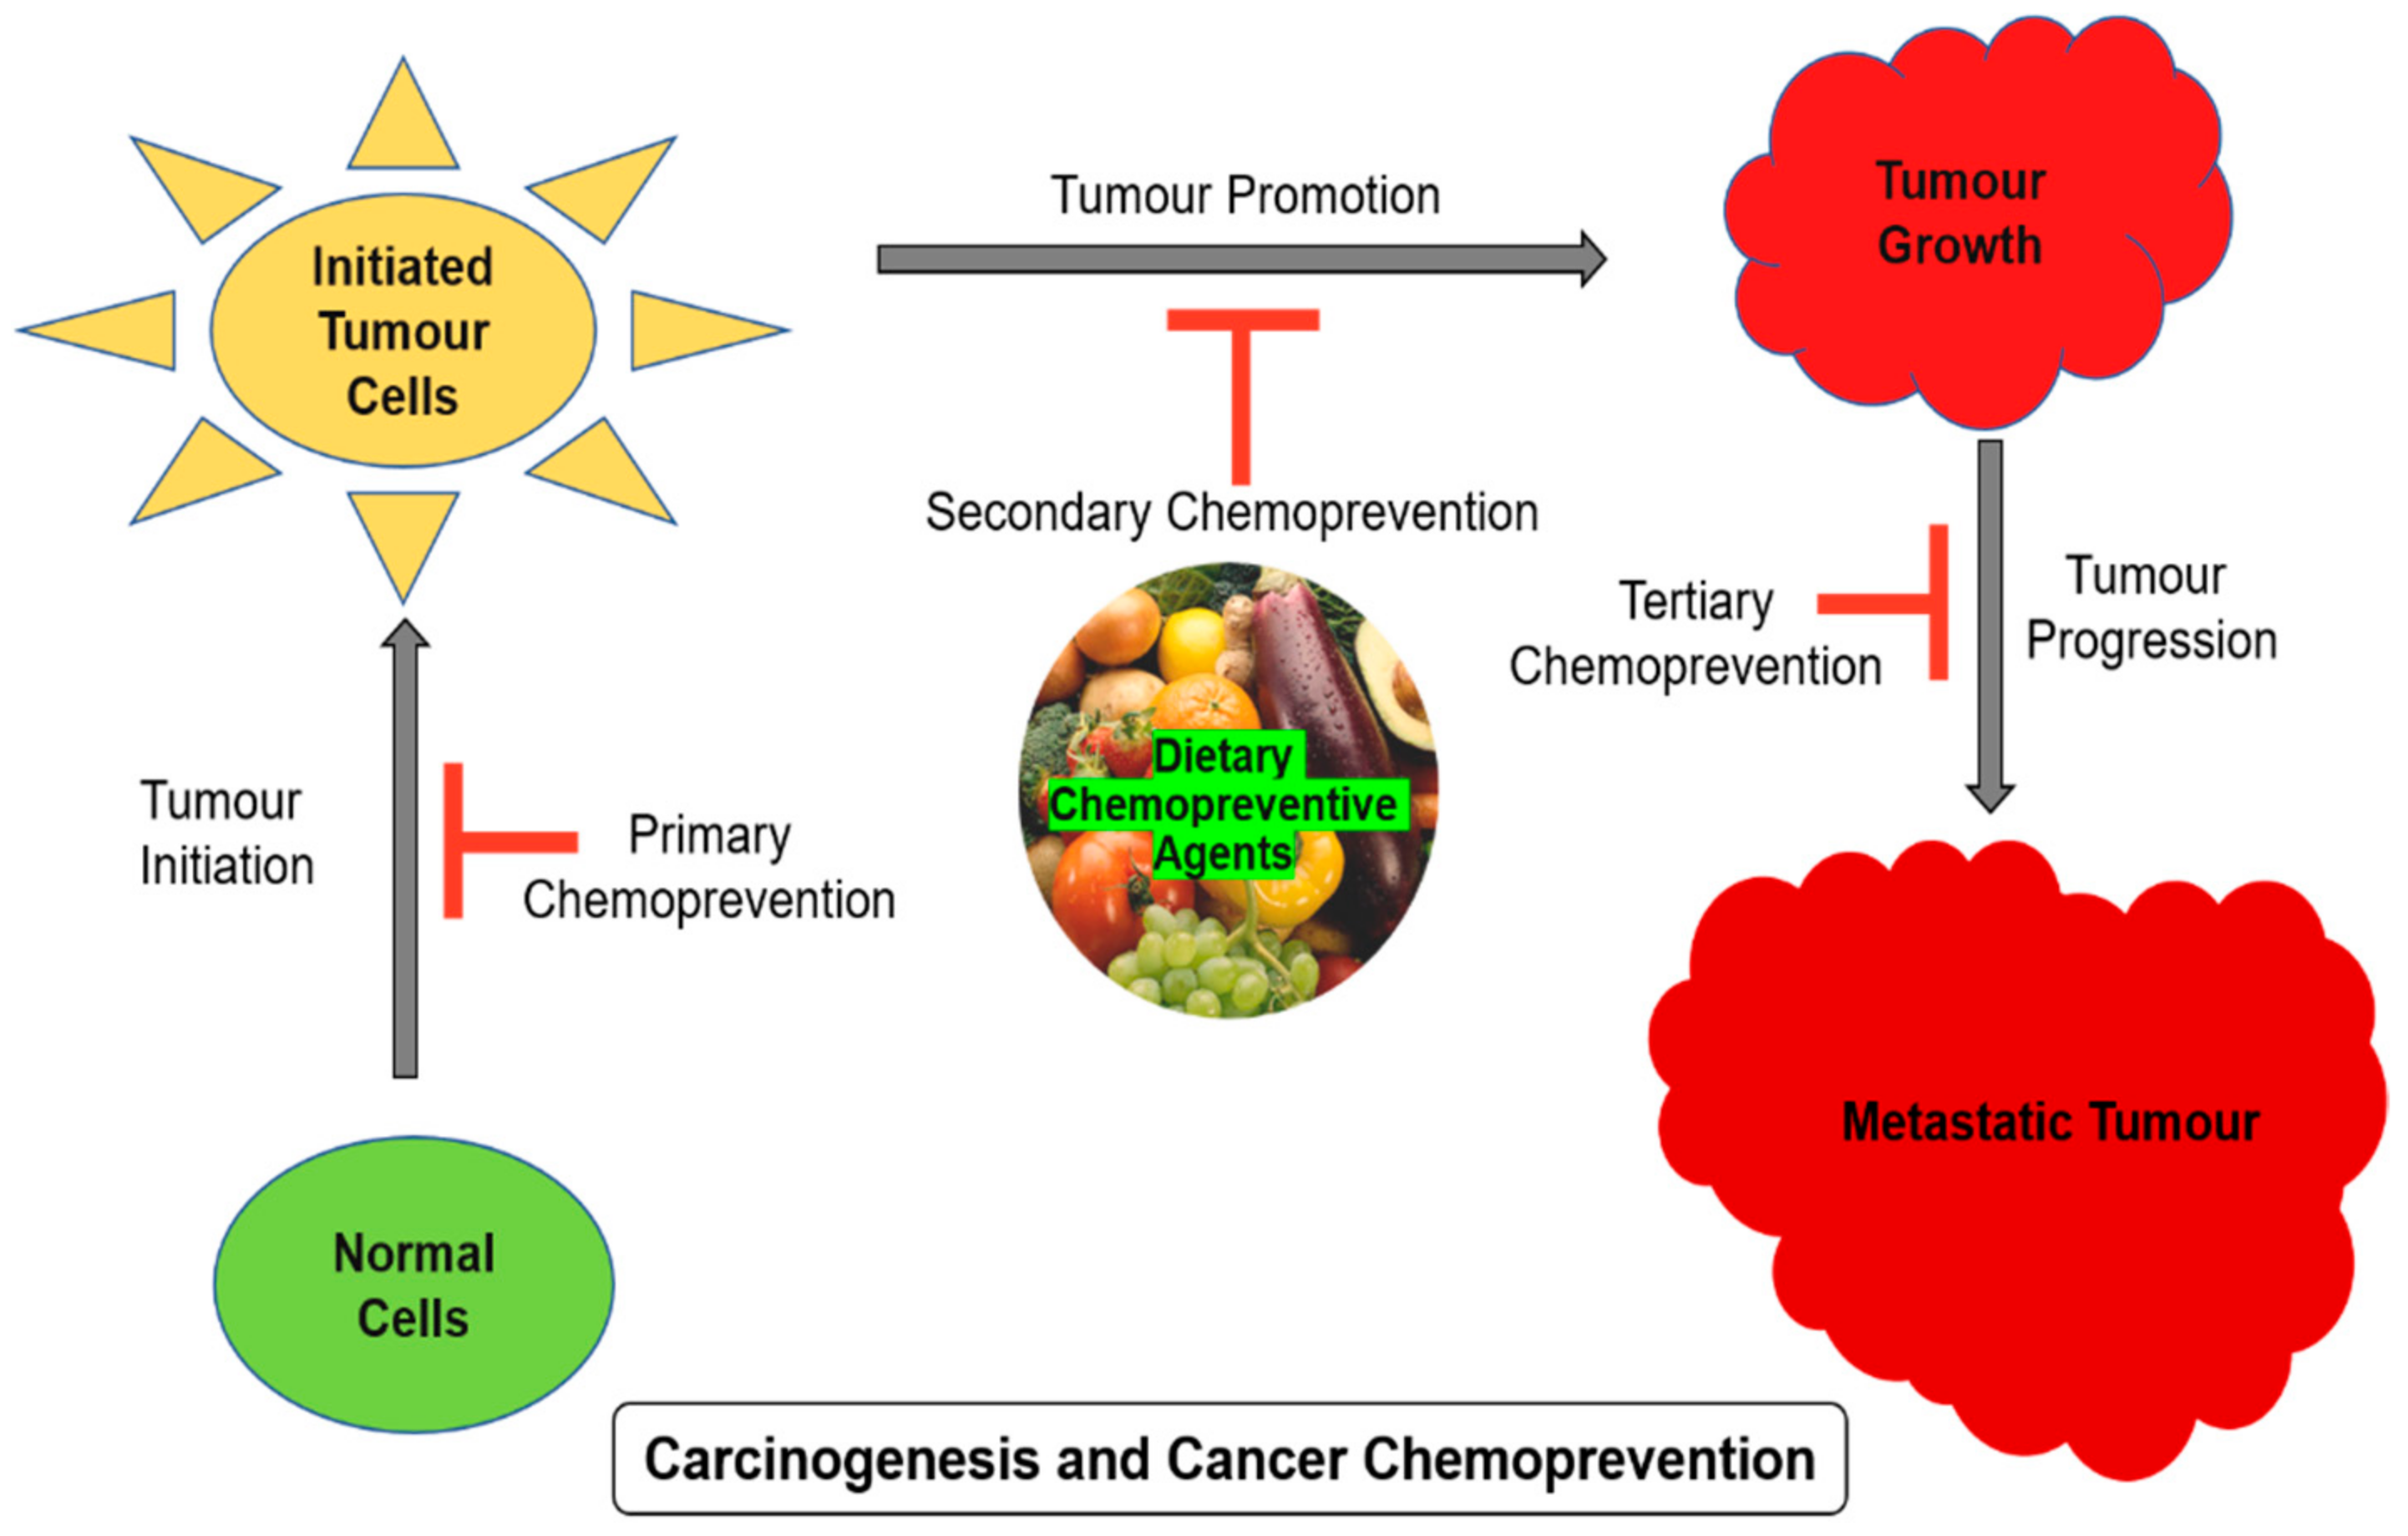 Phytochemicals with anti-carcinogenic properties